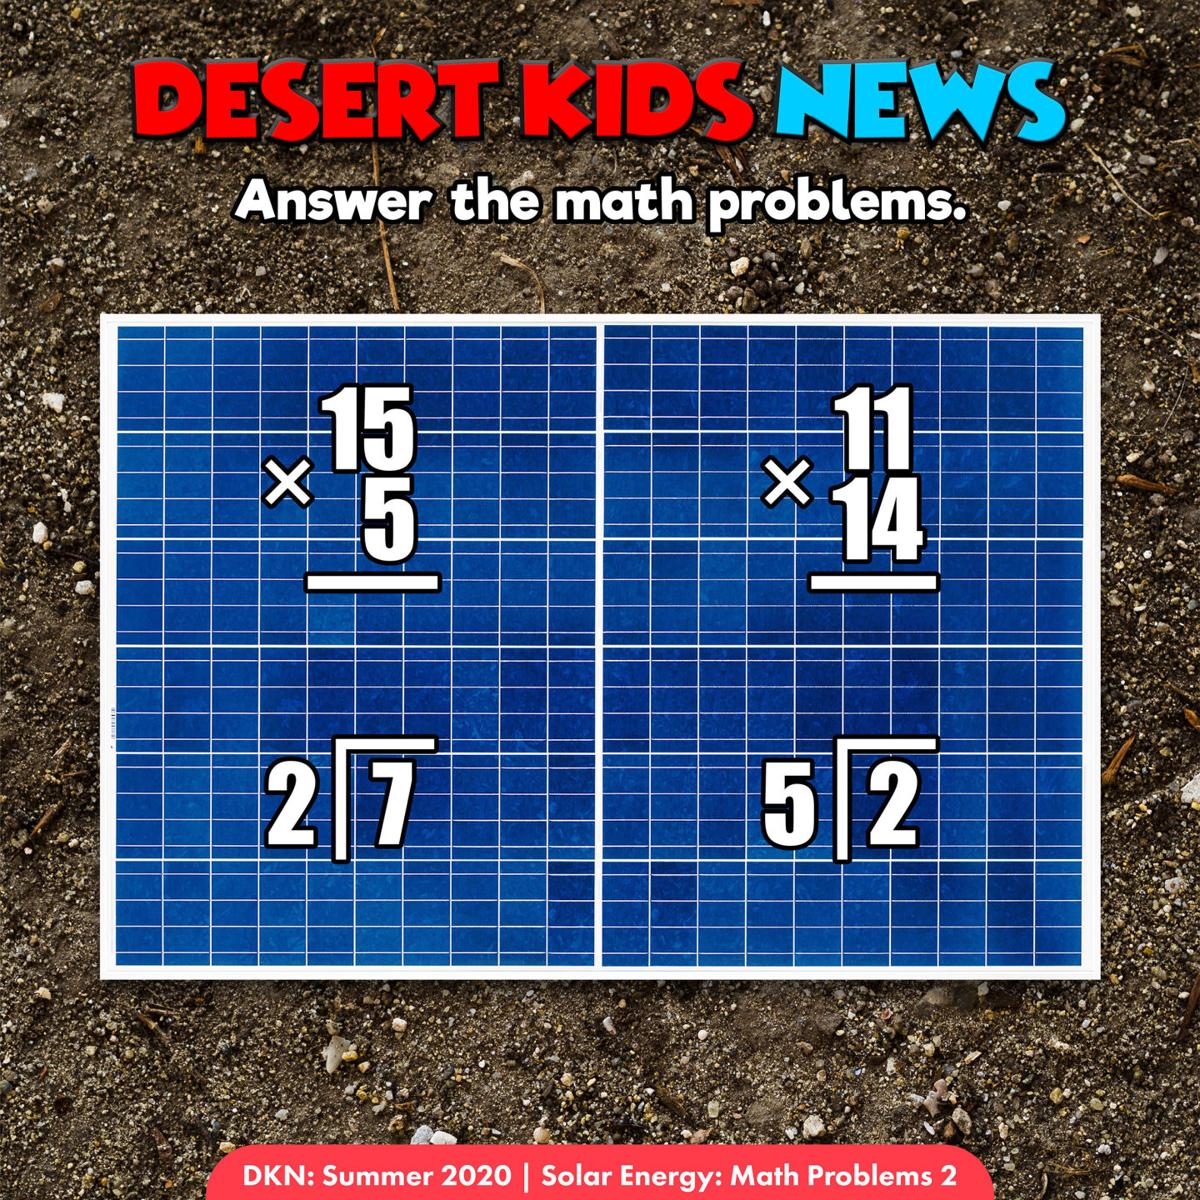 solar-energy-math-activities-desert-kids-news-thedesertreview